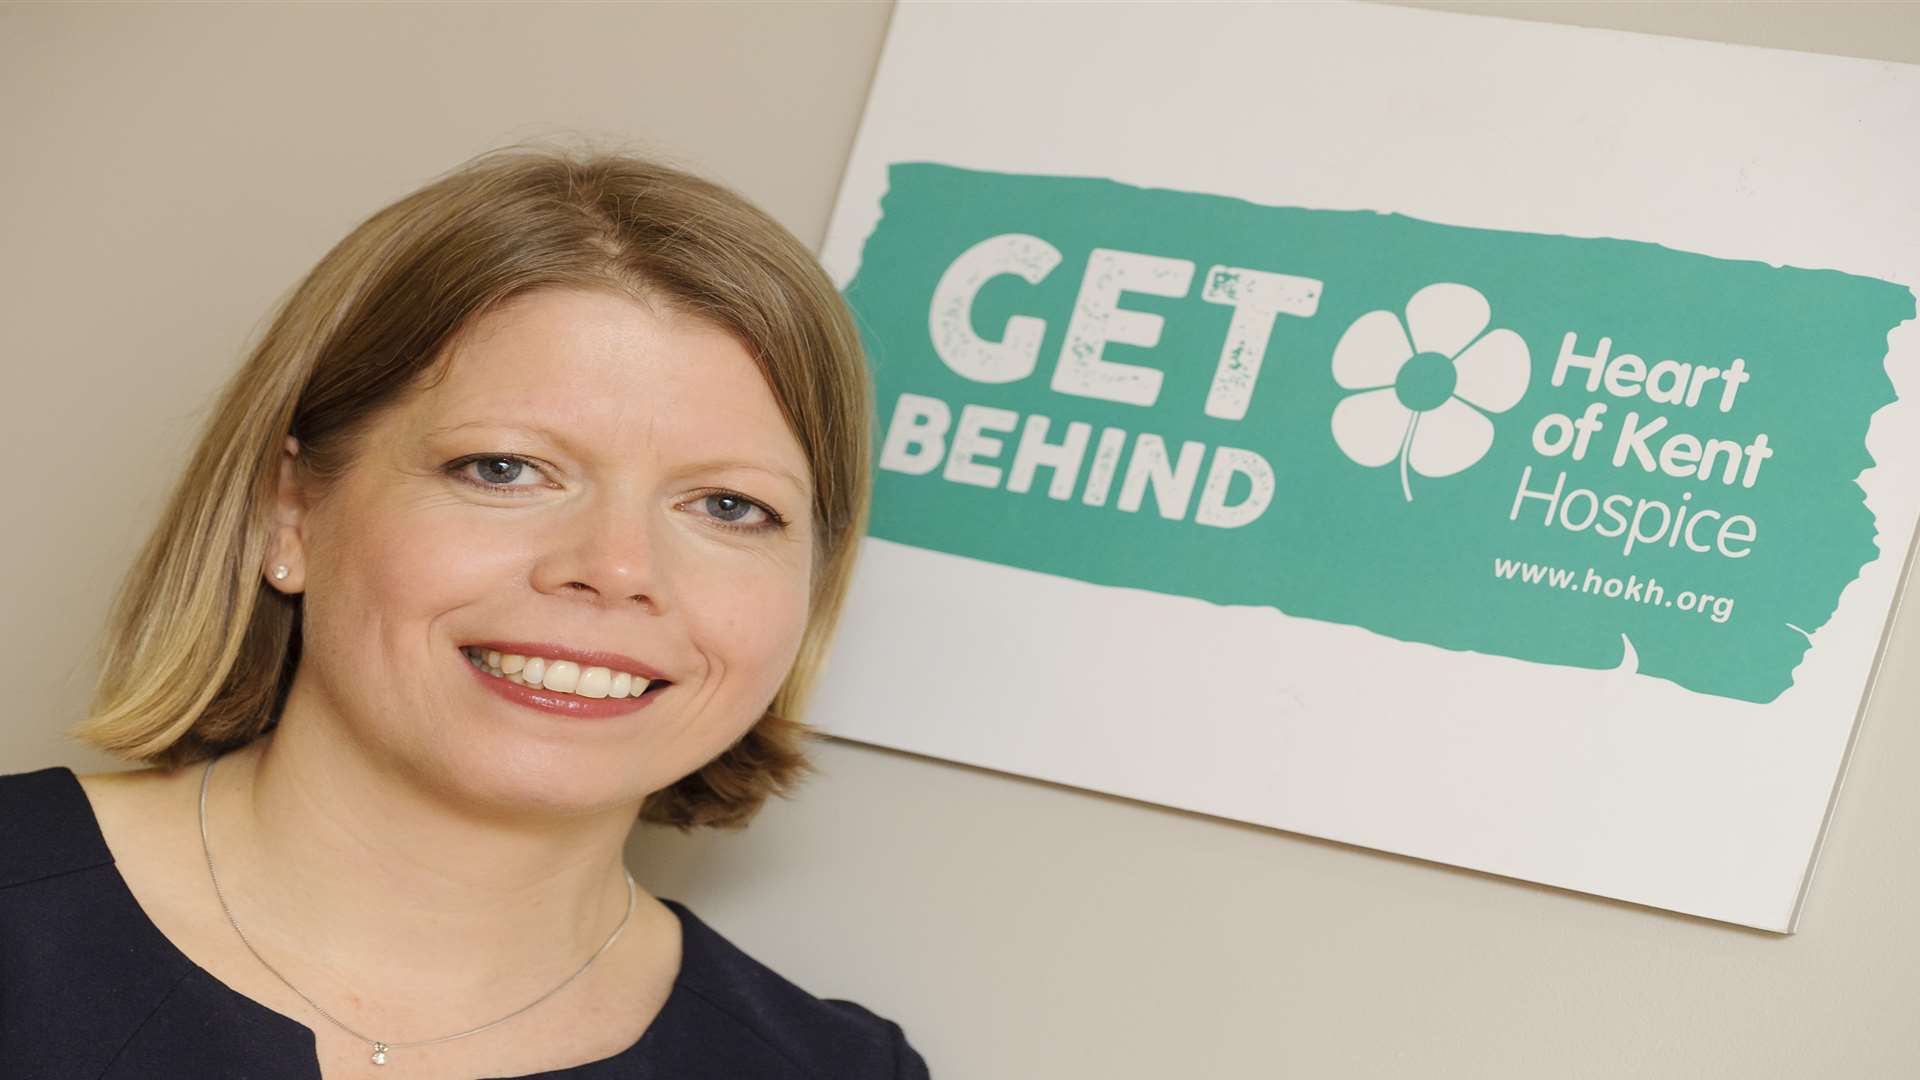 Sarah Pugh is the CEO of Heart of Kent Hospice